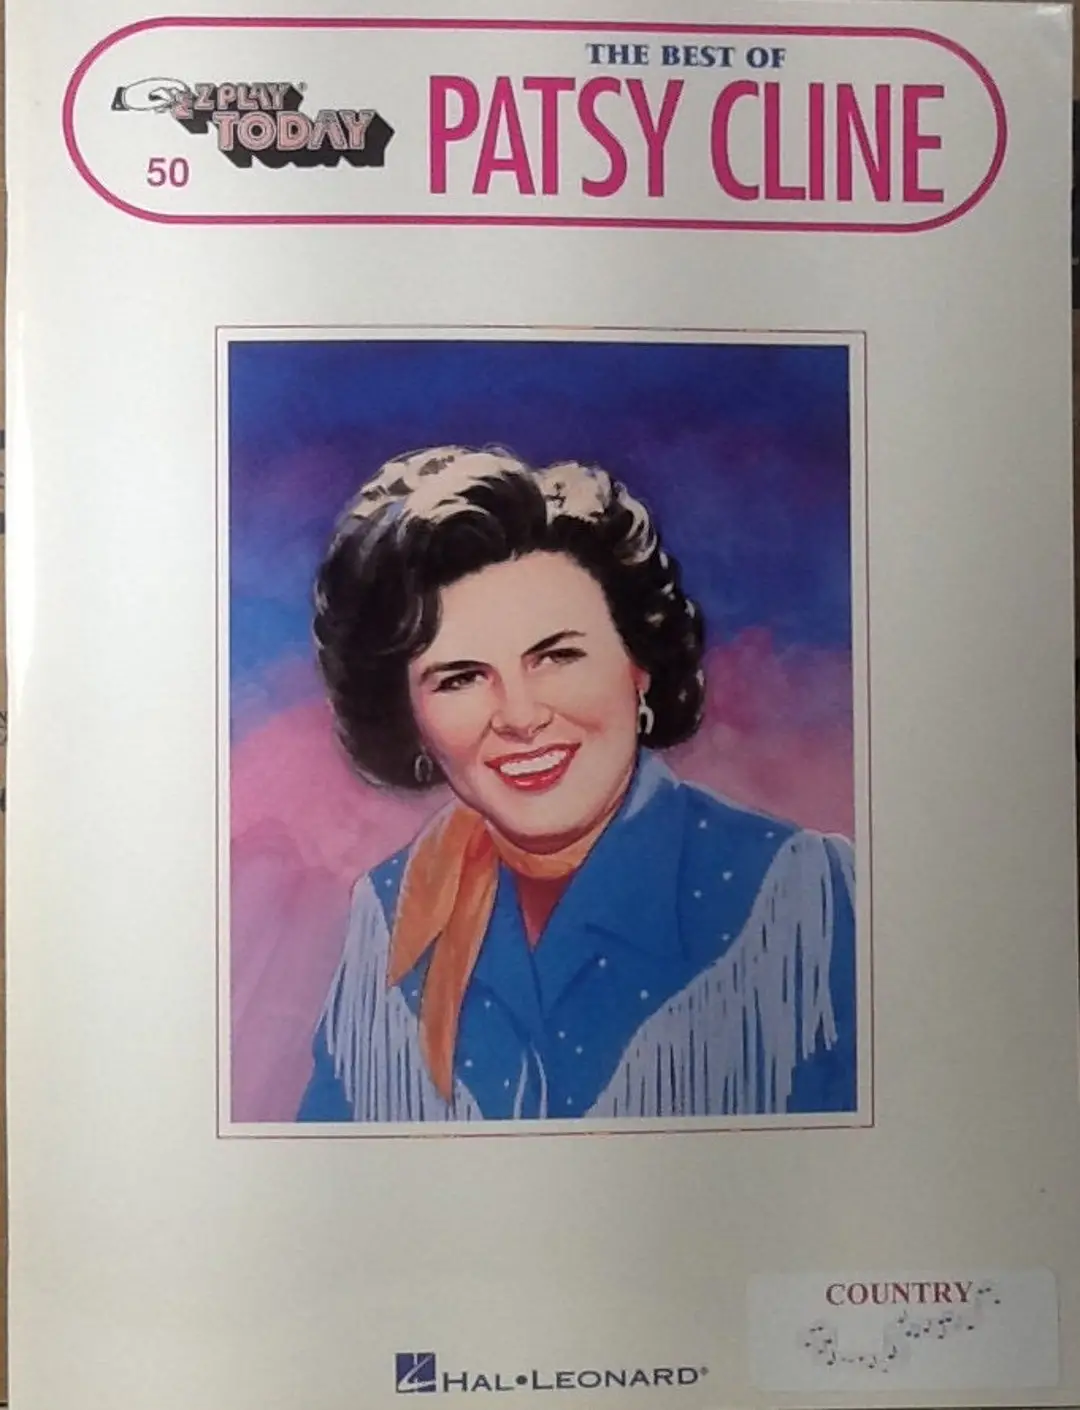 Top 10 Famous Patsy Cline Songs You Need to Hear